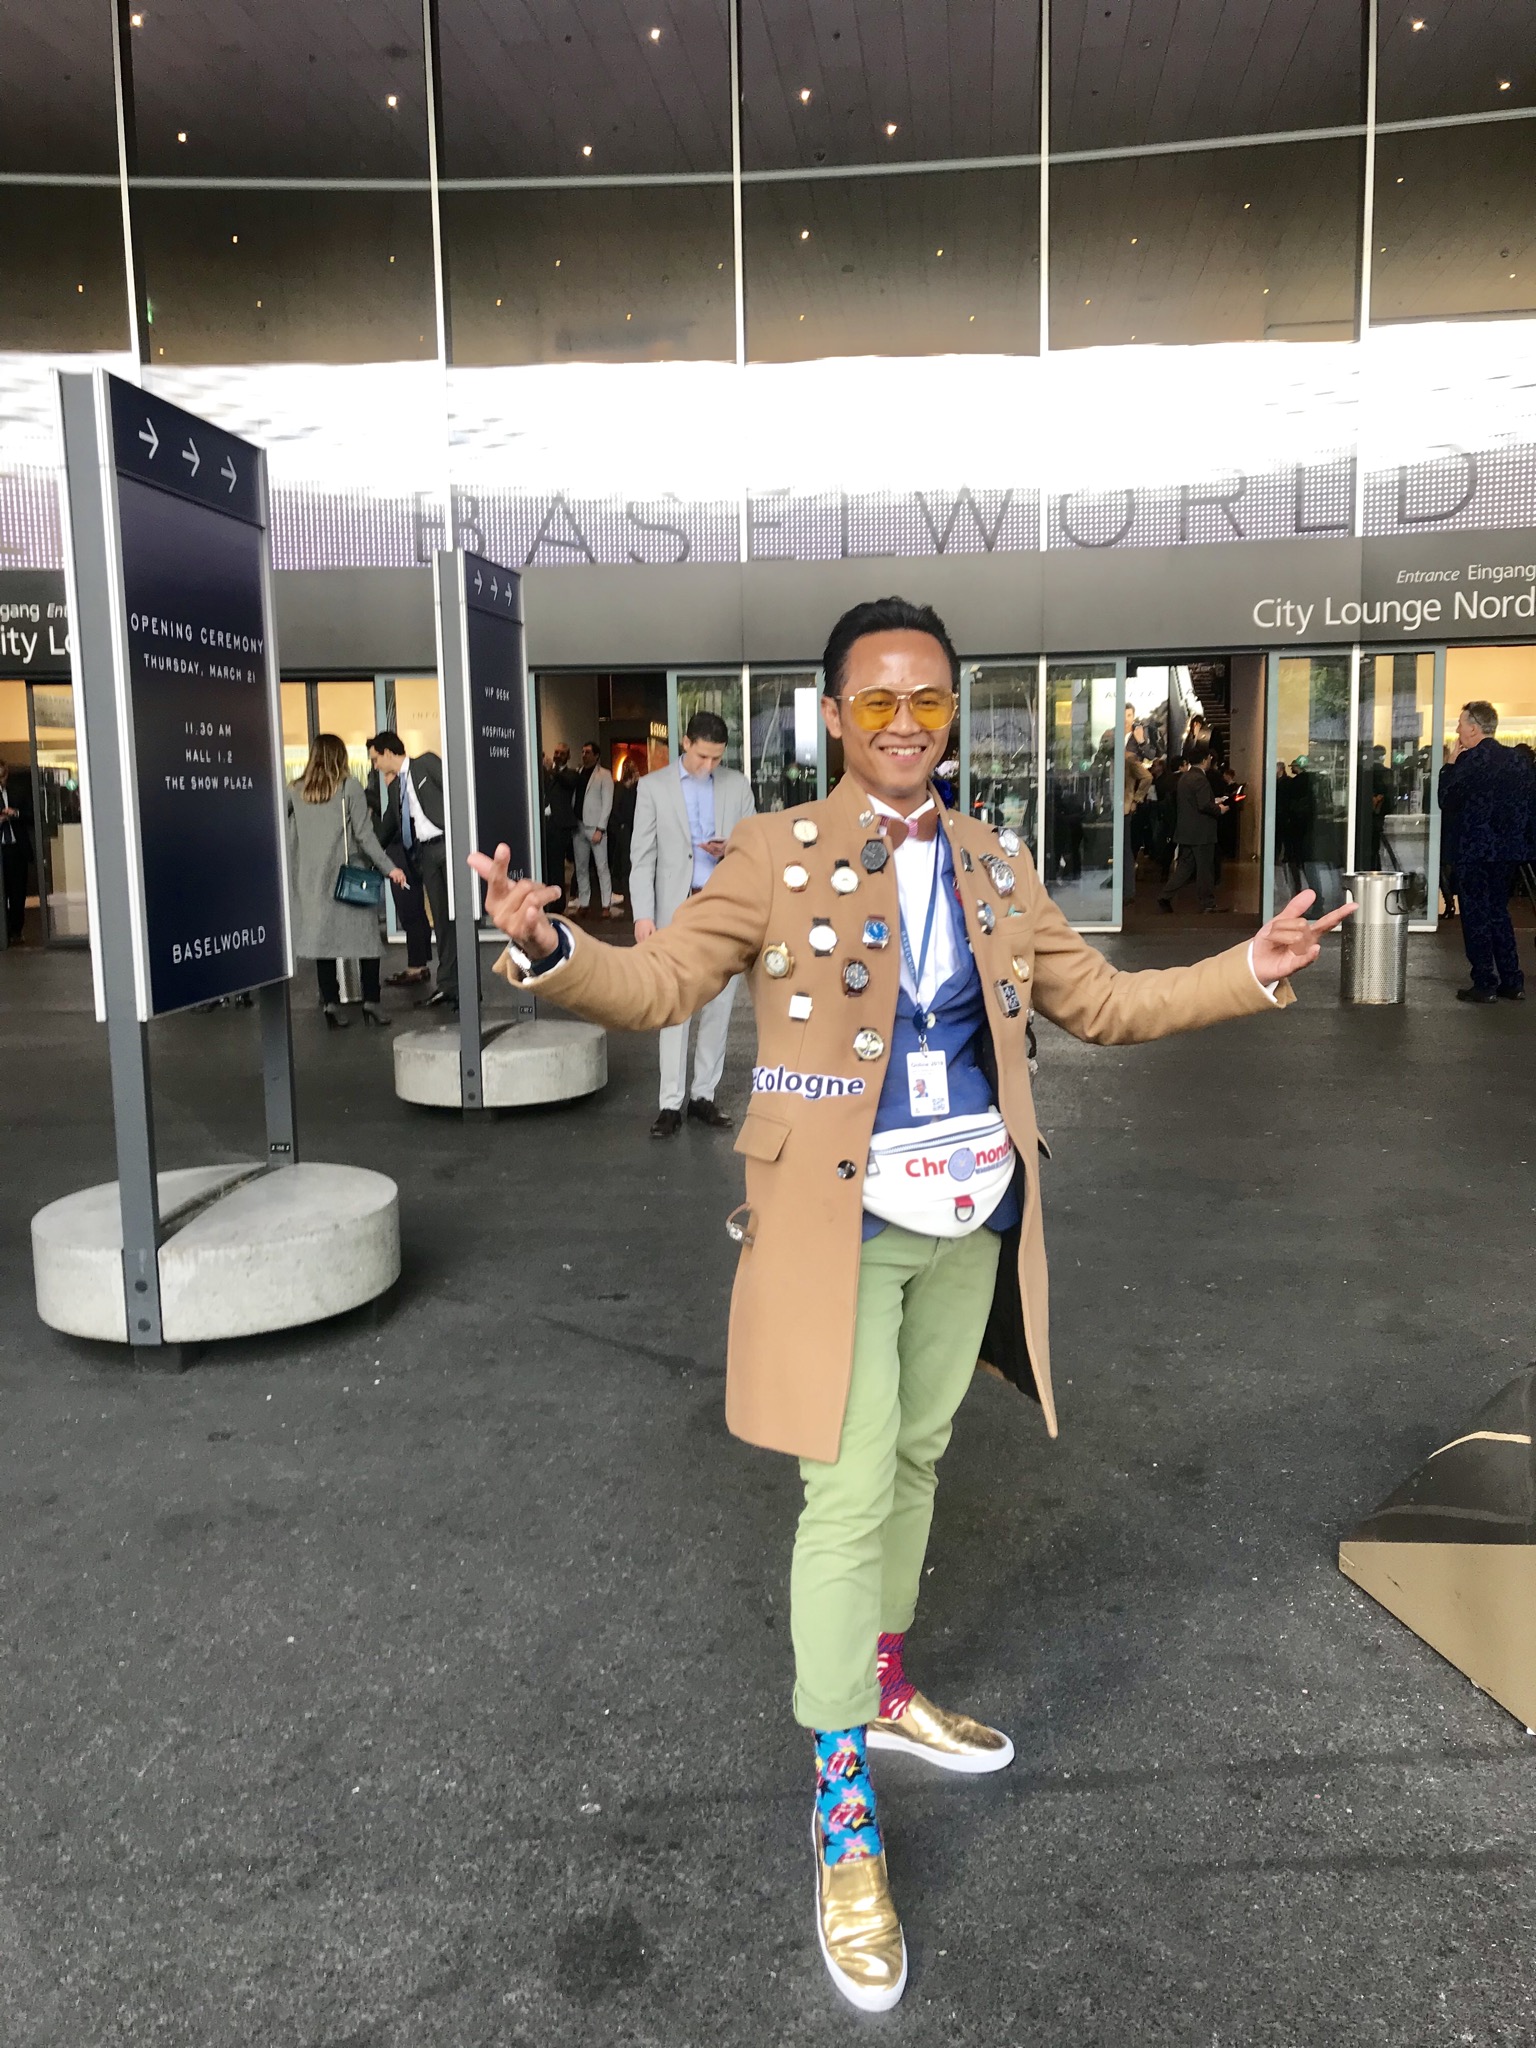 BaselWorld 2019: The YESES and NOS